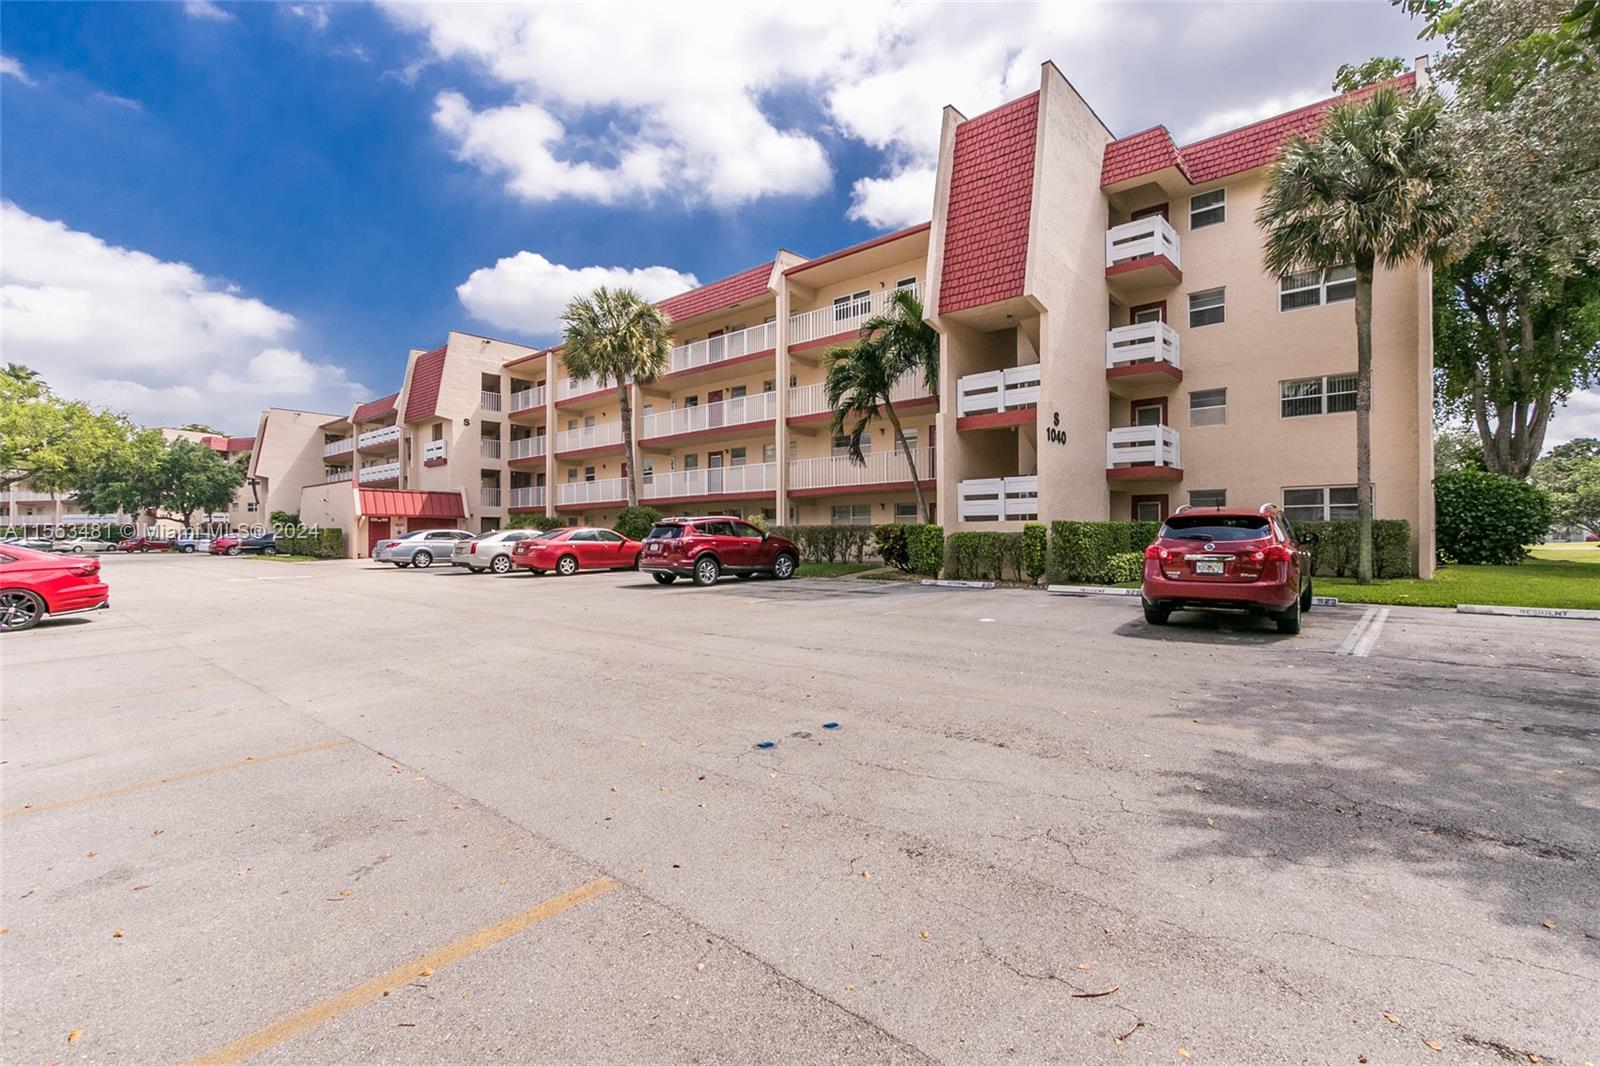 Photo of 1040 Country Club Dr #408 in Margate, FL